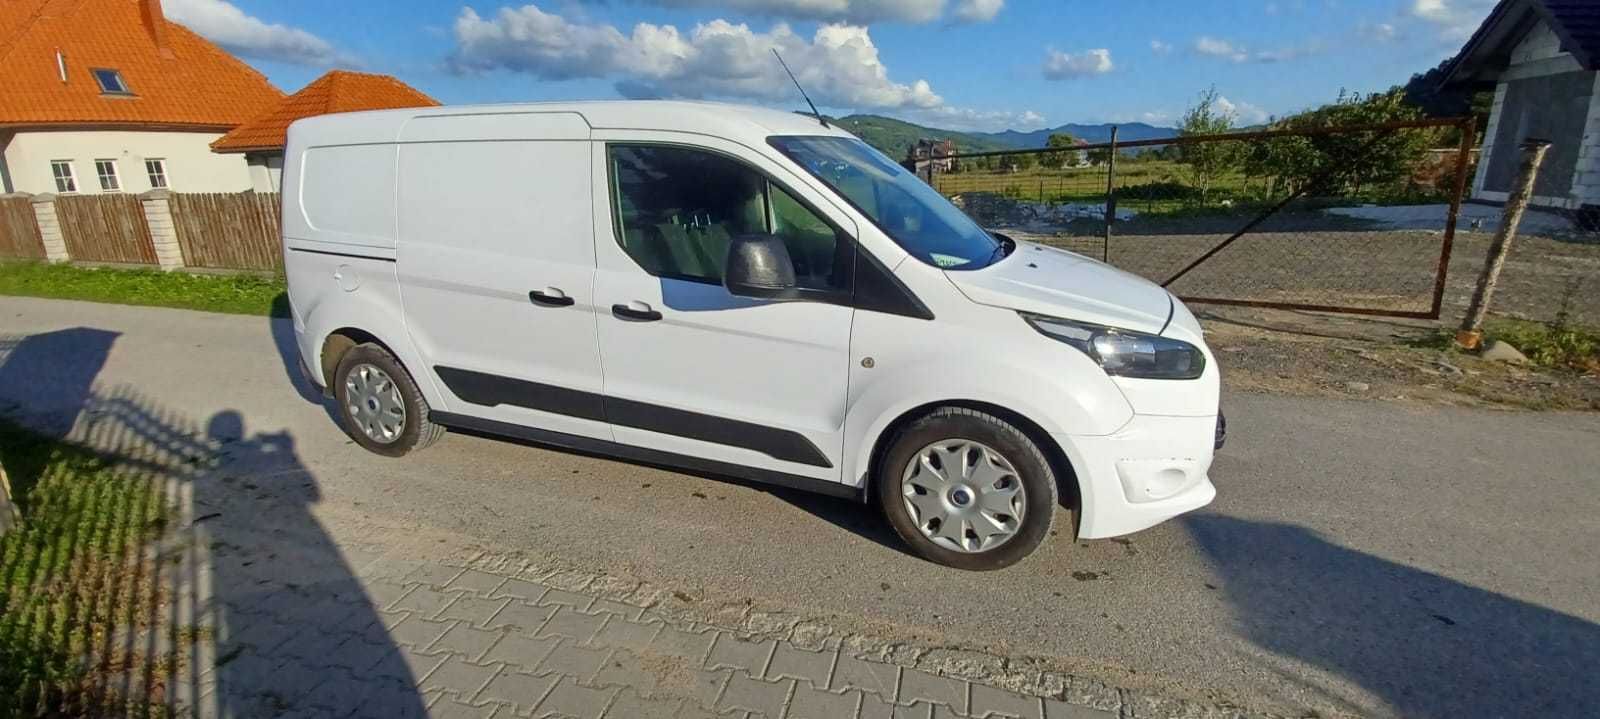 Ford Transit Connect 2015 rok 1.6 tdci long